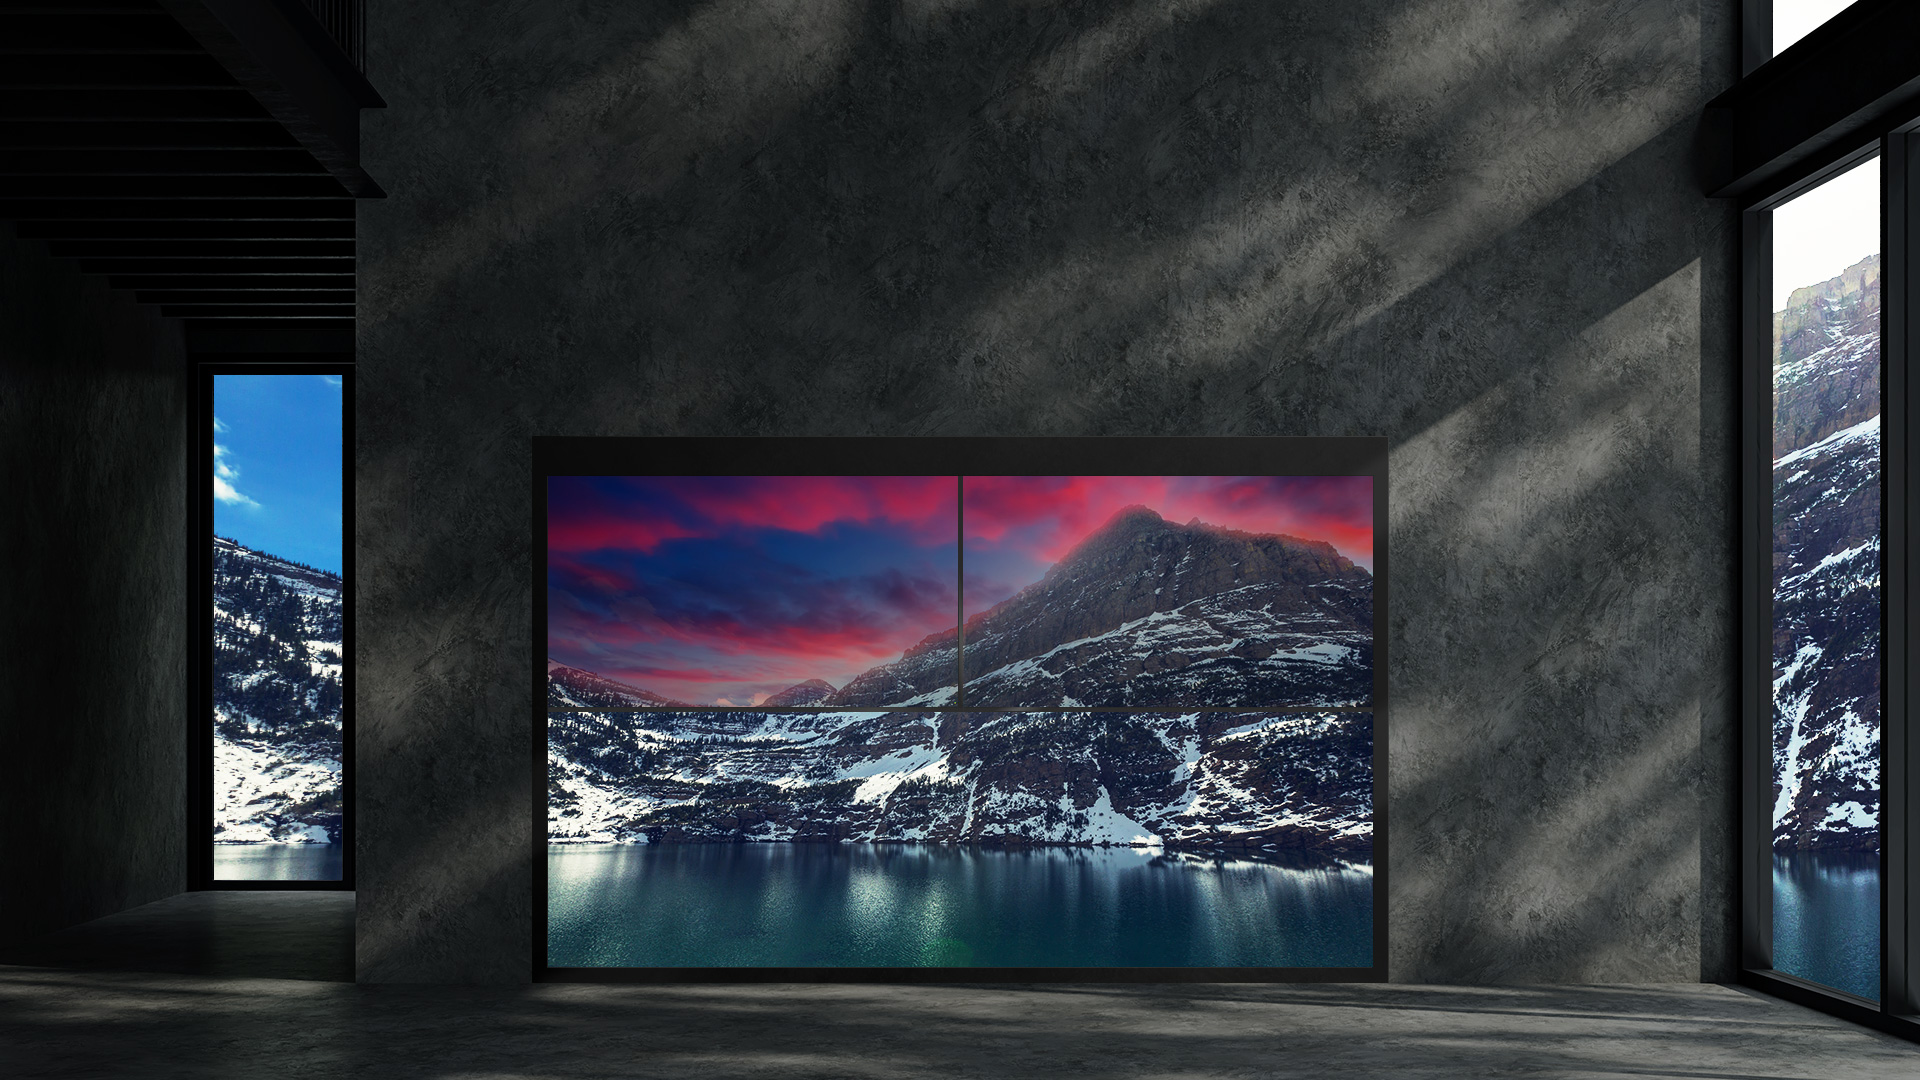 A sunset imagery displayed on a single Transparent OLED signage overlaid with the snowy mountain image in the background.